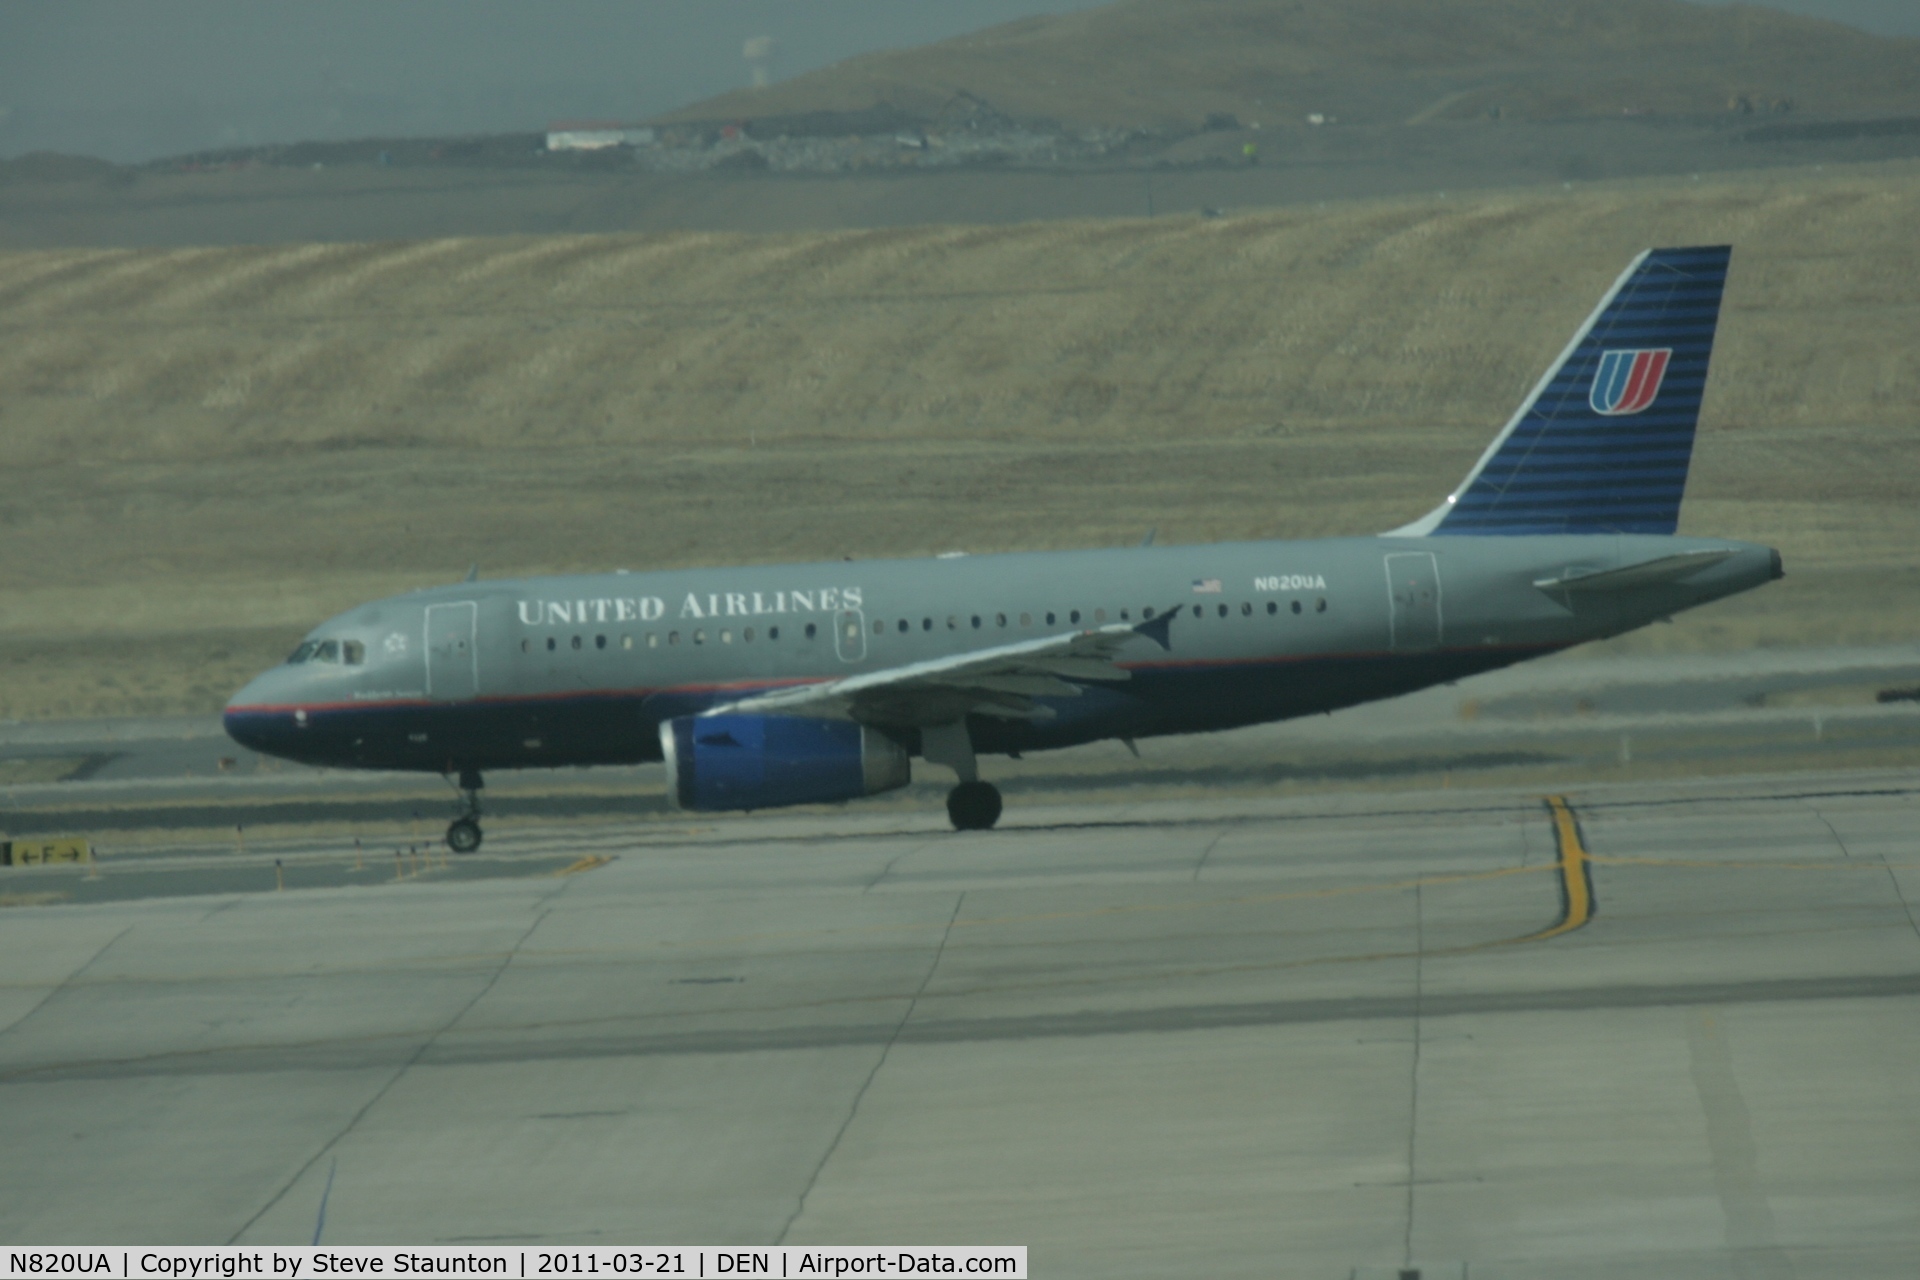 N820UA, 1998 Airbus A319-131 C/N 898, Taken at Denver International Airport, in March 2011 whilst on an Aeroprint Aviation tour